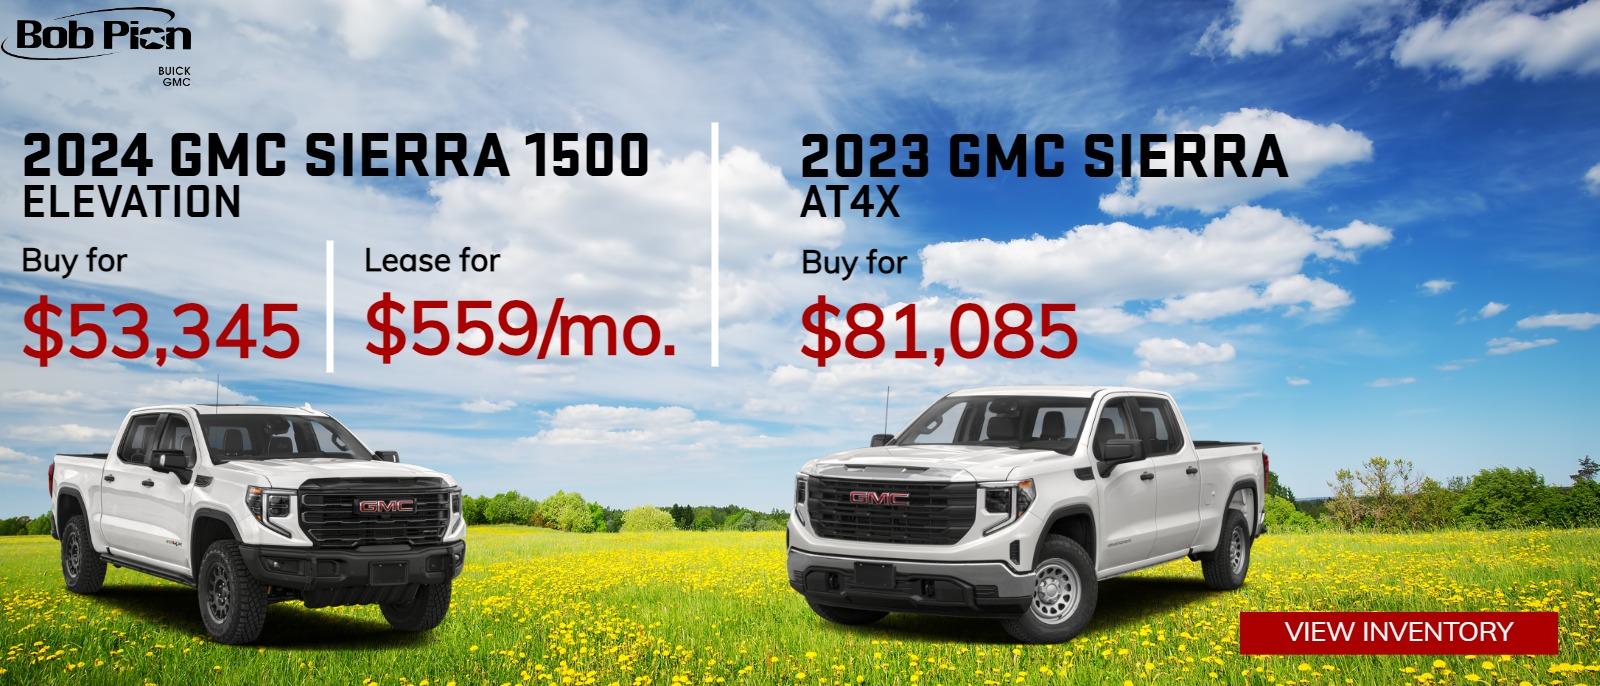 Lease for $559/mo Save $2257 OFF MSRP ($3559 D.A.S, Not all will qualify, Must have A+ Tier Credit, Lease Loyalty Rebate, $0 Acquisition Fee)
Buy for: $53,345 $4,000 OFF MSRP!

 G233066 2023 GMC Sierra AT4X: Buy for $81,085! $10,000 OFF MSRP!